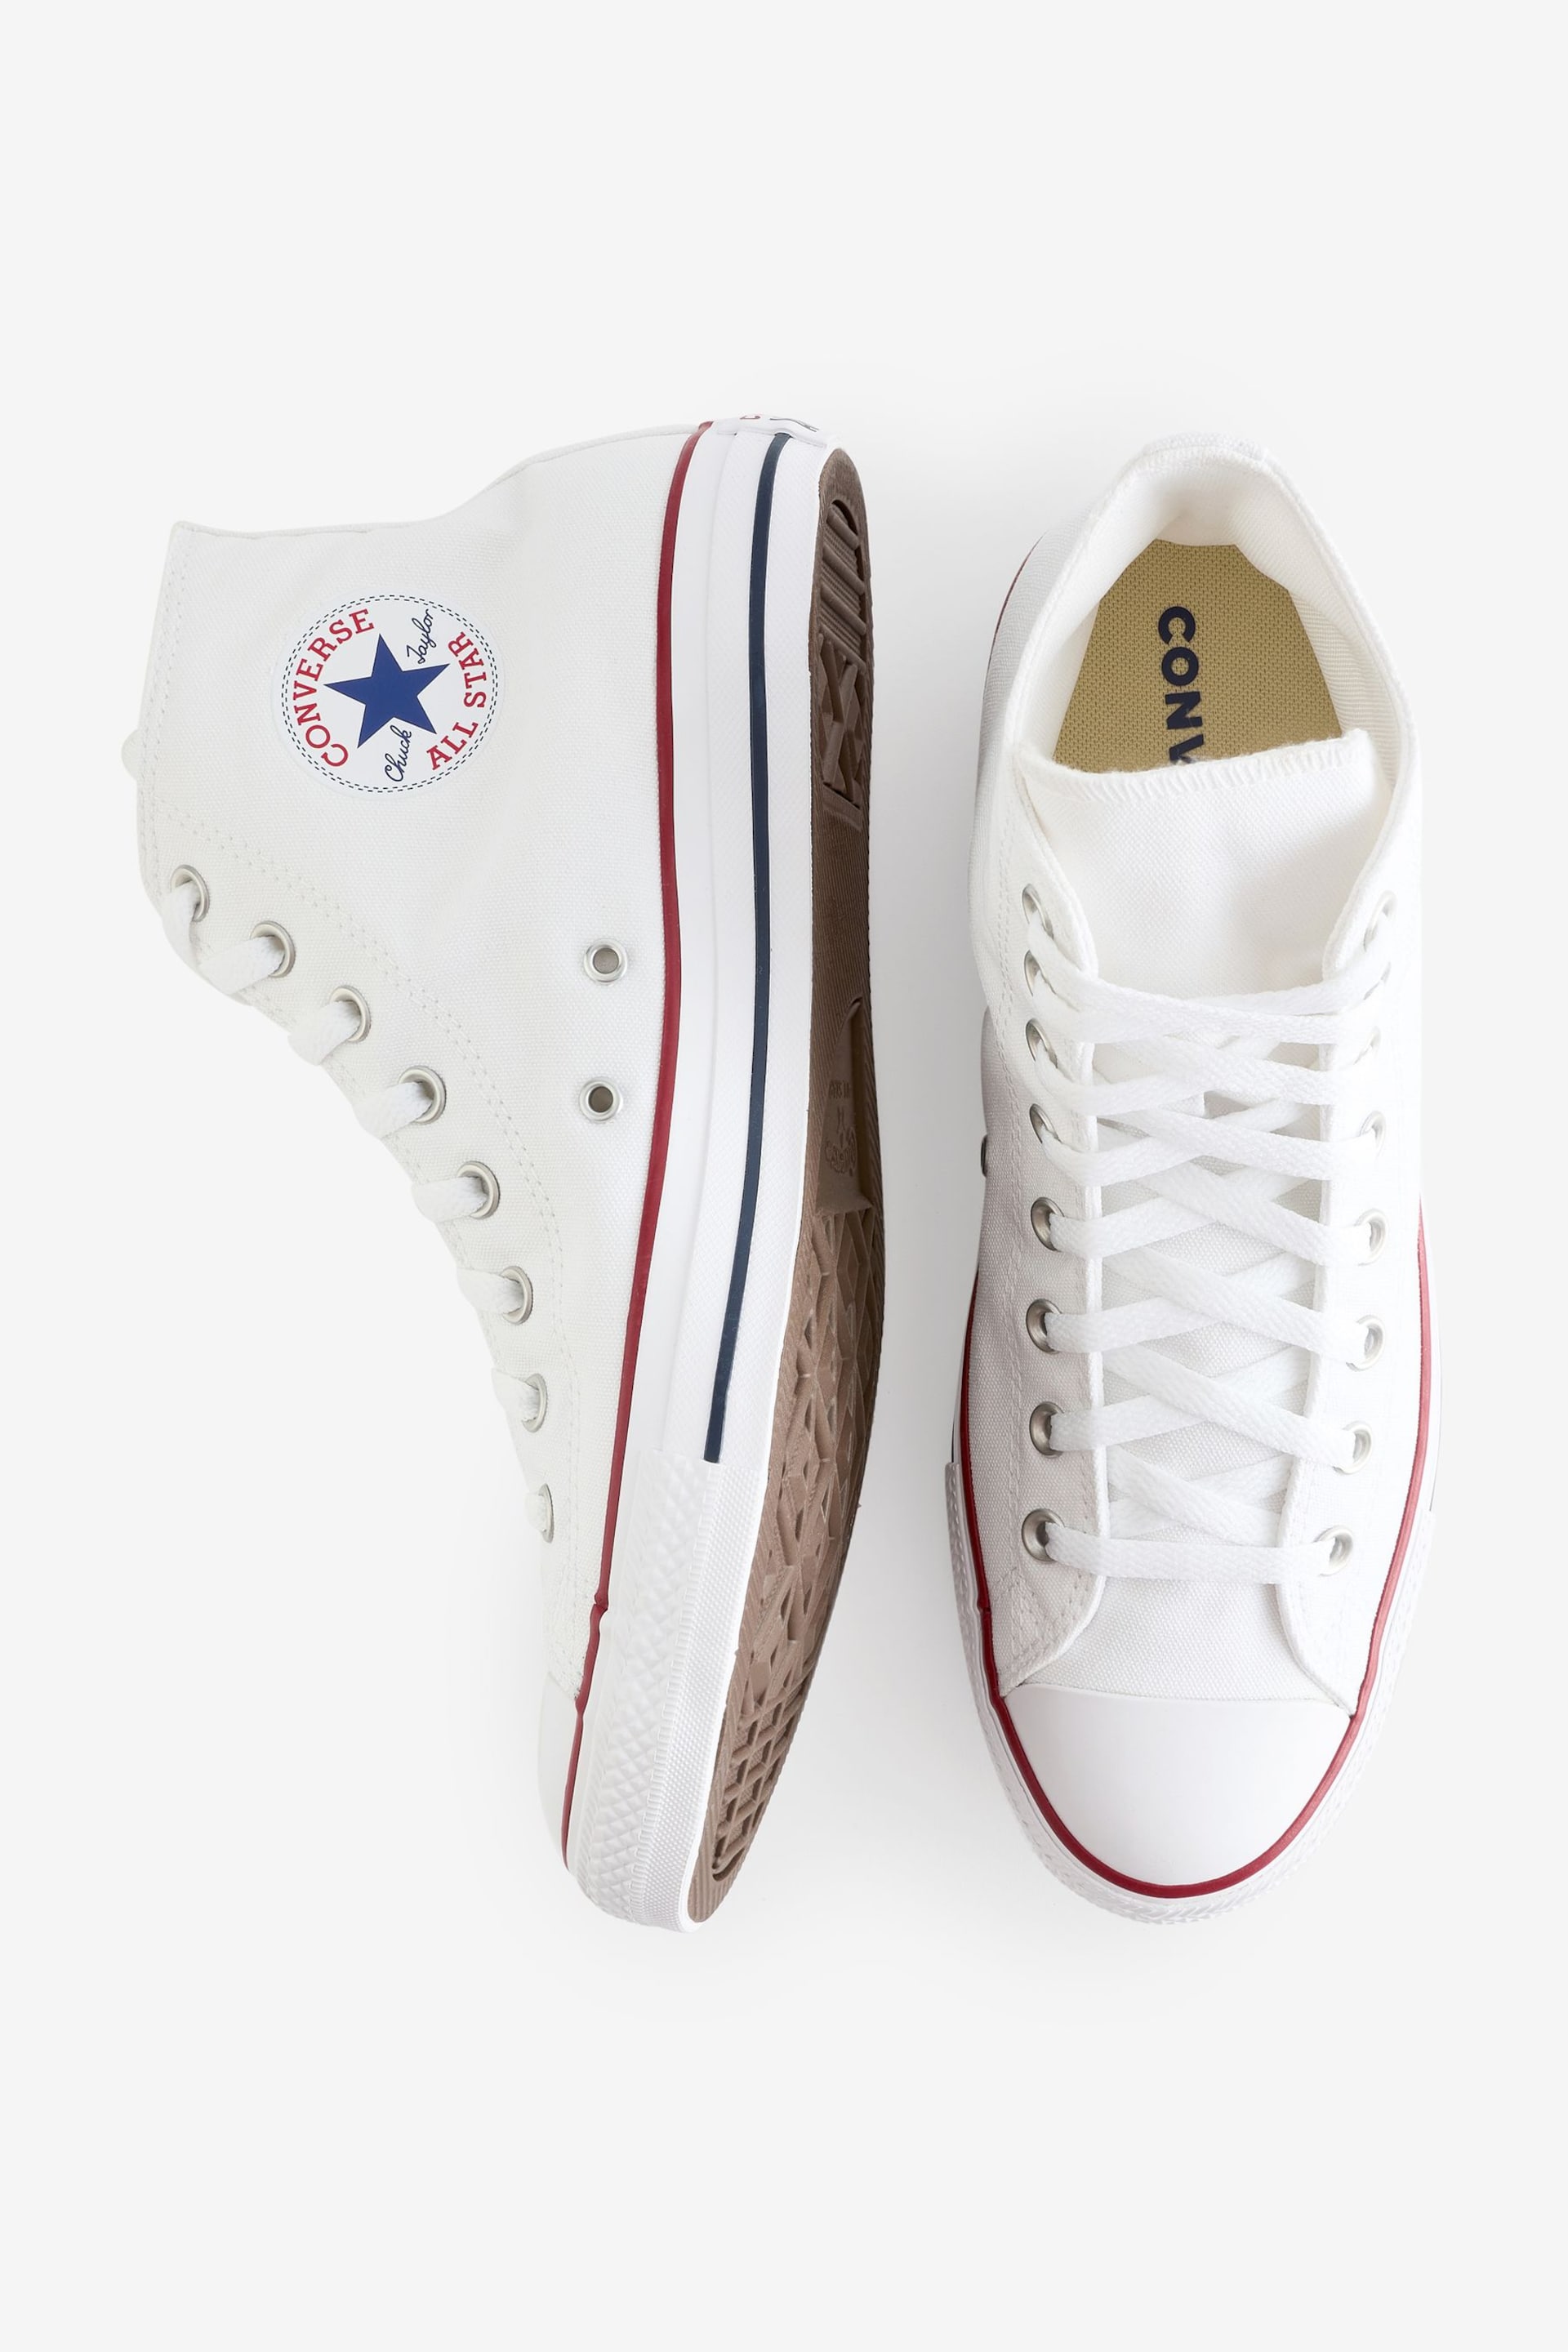 Converse White Chuck Taylor All Star Wide High Top Trainers - Image 8 of 8